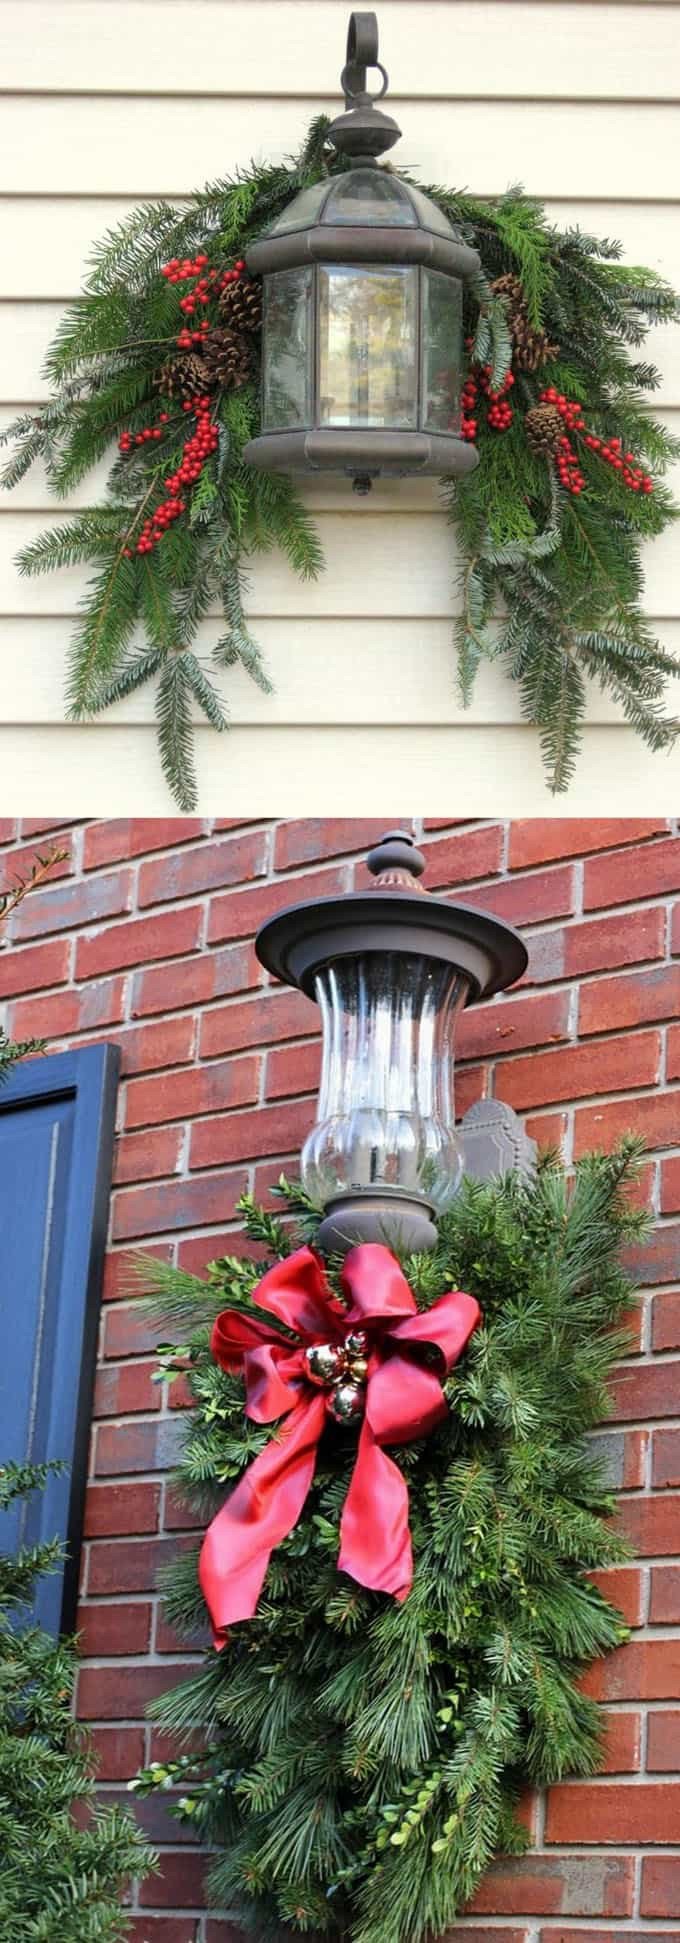 DIY Outside Christmas Decorations
 Gorgeous Outdoor Christmas Decorations 32 Best Ideas